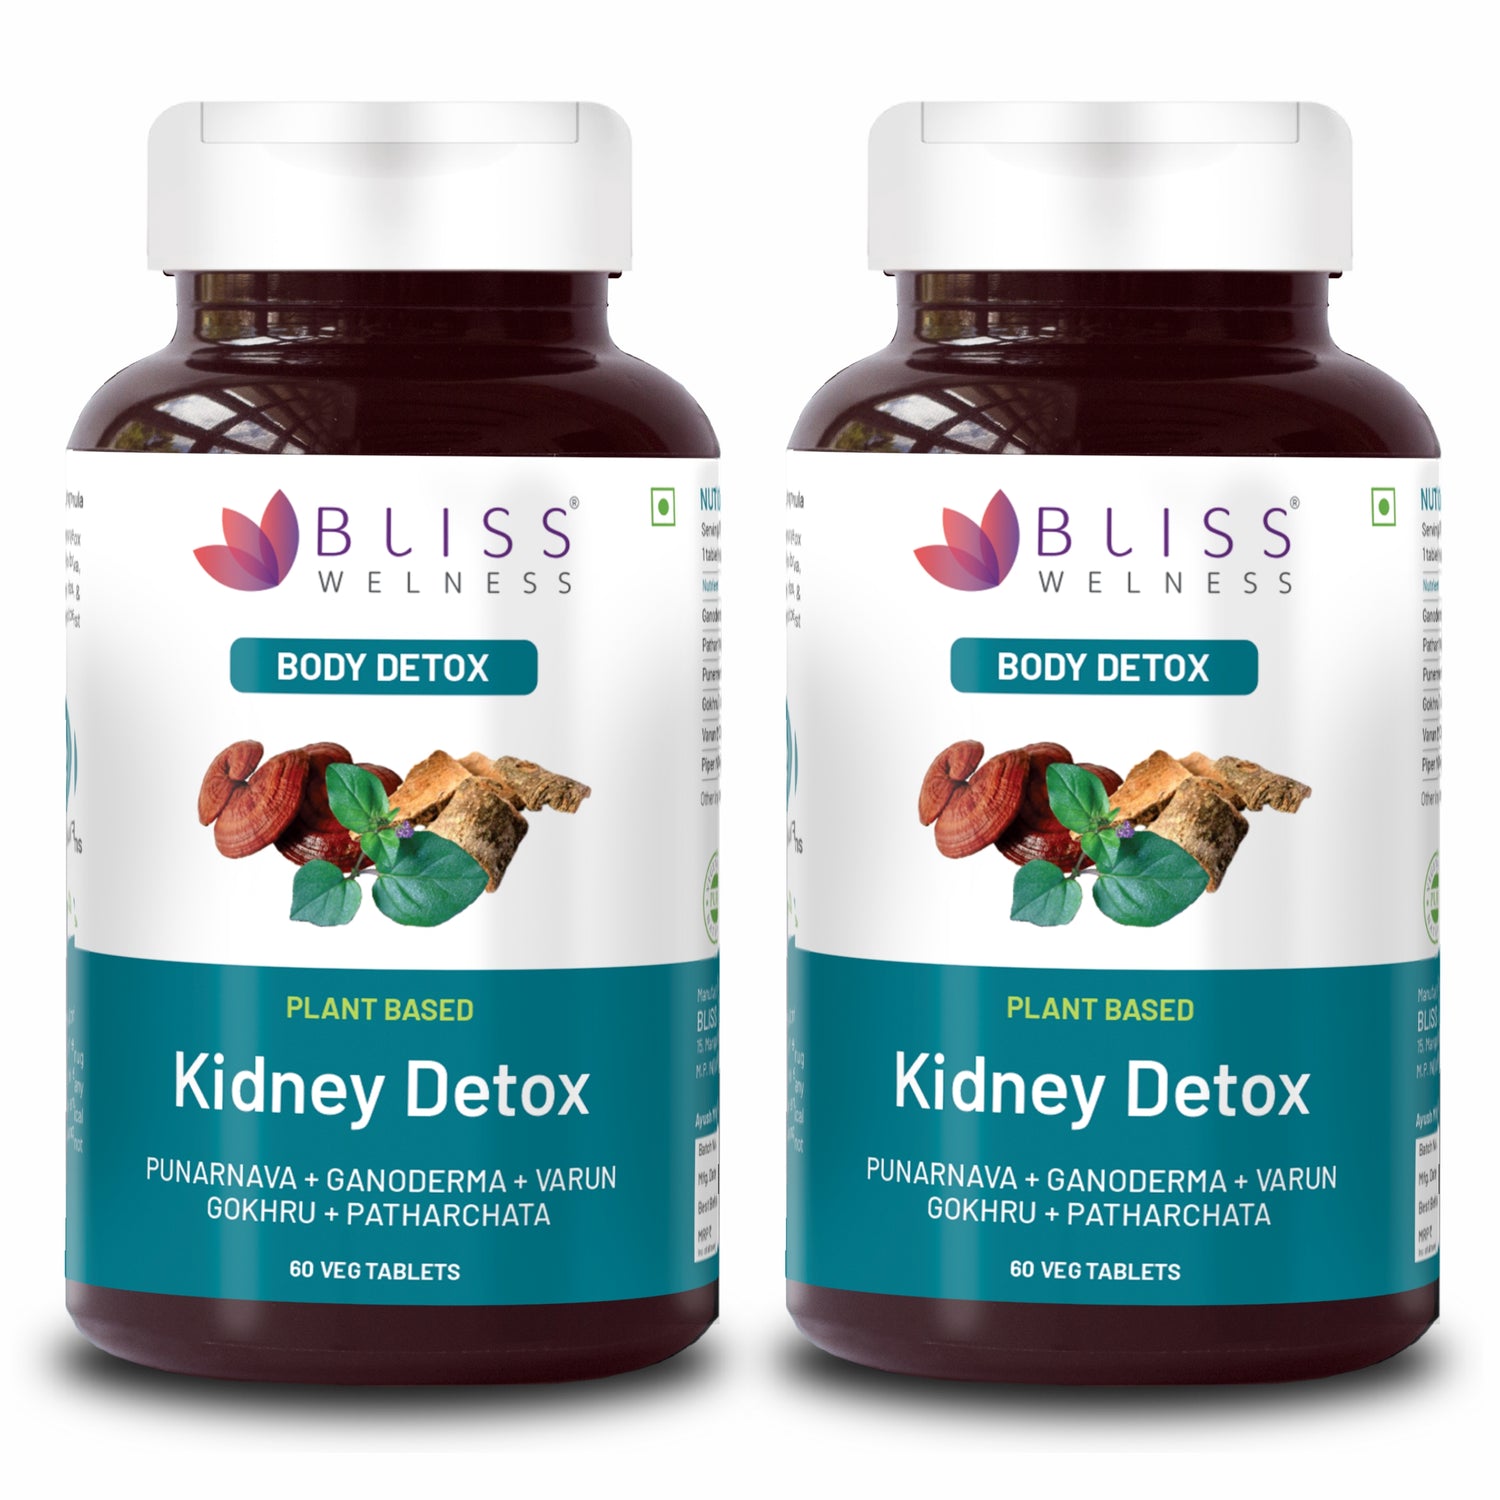 Bliss Welness Kidney Detox Cleanse Purifier | Gokhru Patharchata Ganoderma | Urinary Tract Infection (UTI) Kidney Stone Dissolution Herbal Supplement - 60 Vegetarian Tablets (Pack of 2)